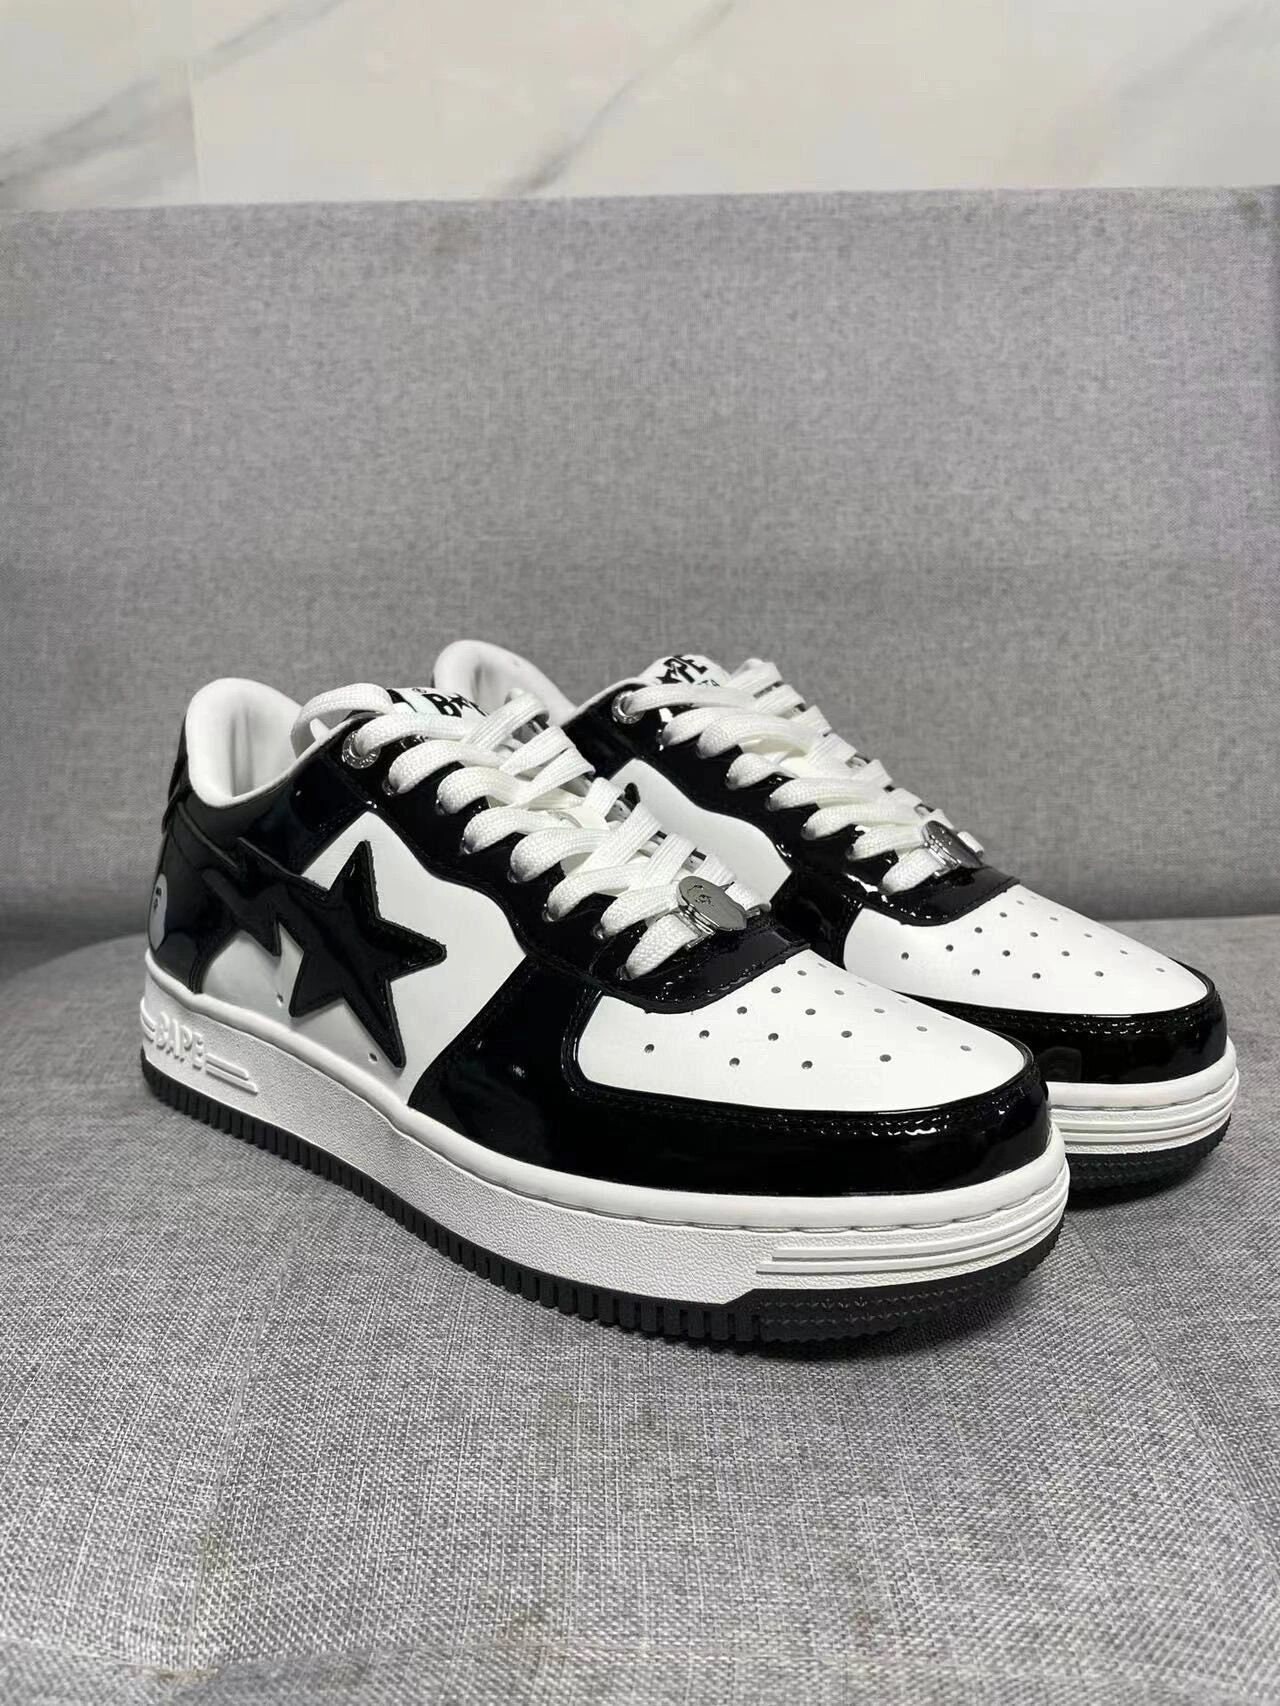 High Quality Bape Shoes Men Black and White Patent Leather - Etsy UK